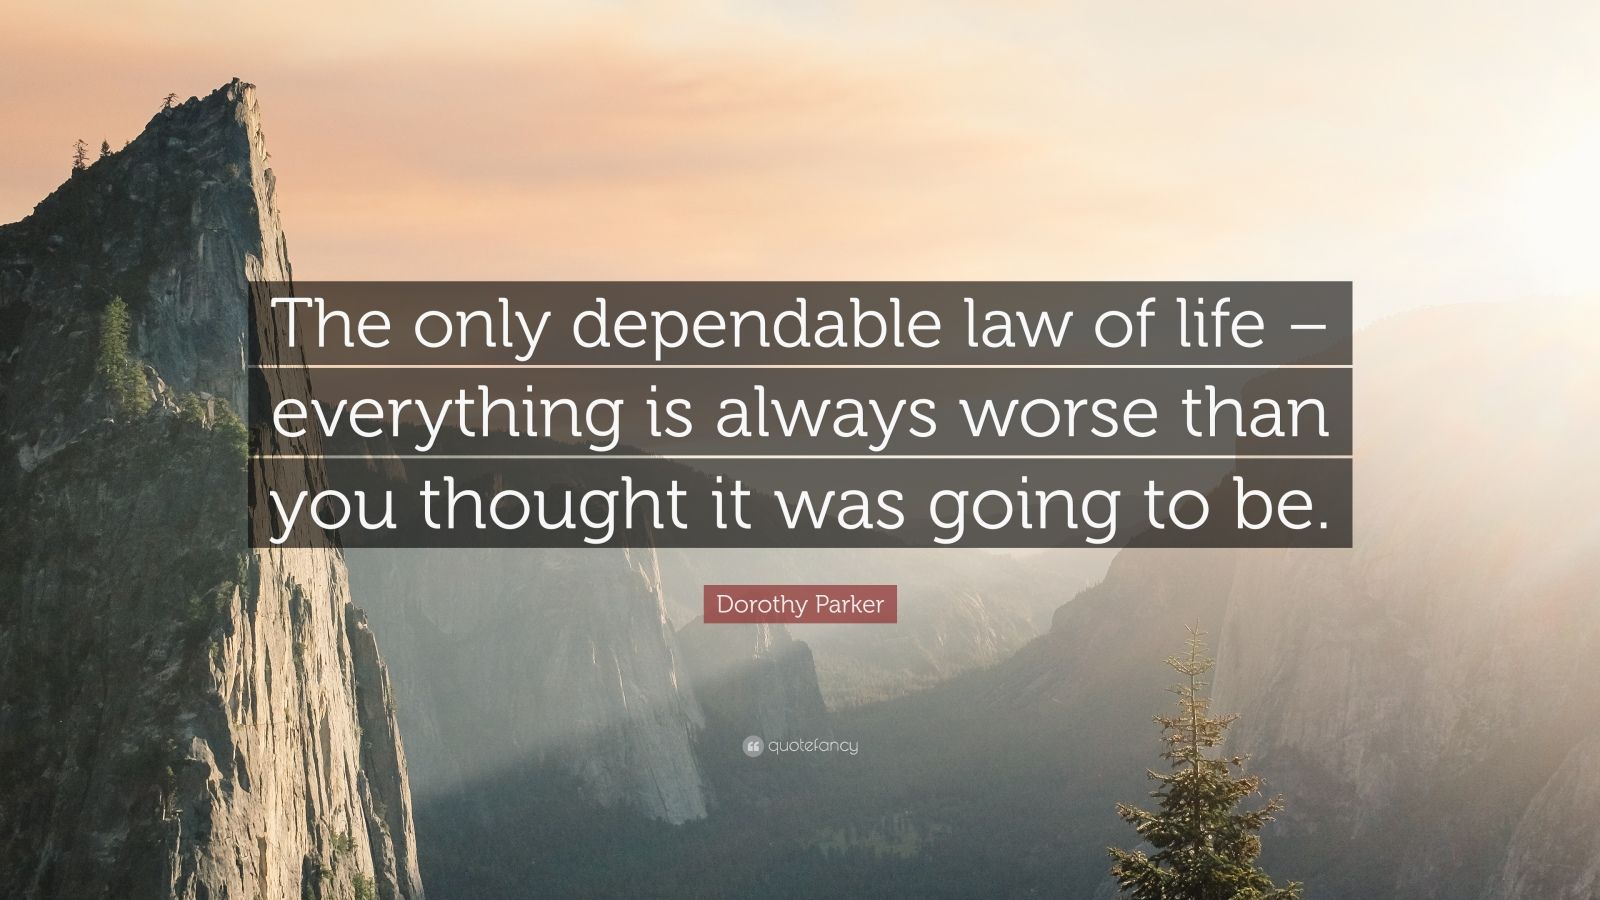 Dorothy Parker Quote: "The only dependable law of life - everything is always worse than you ...